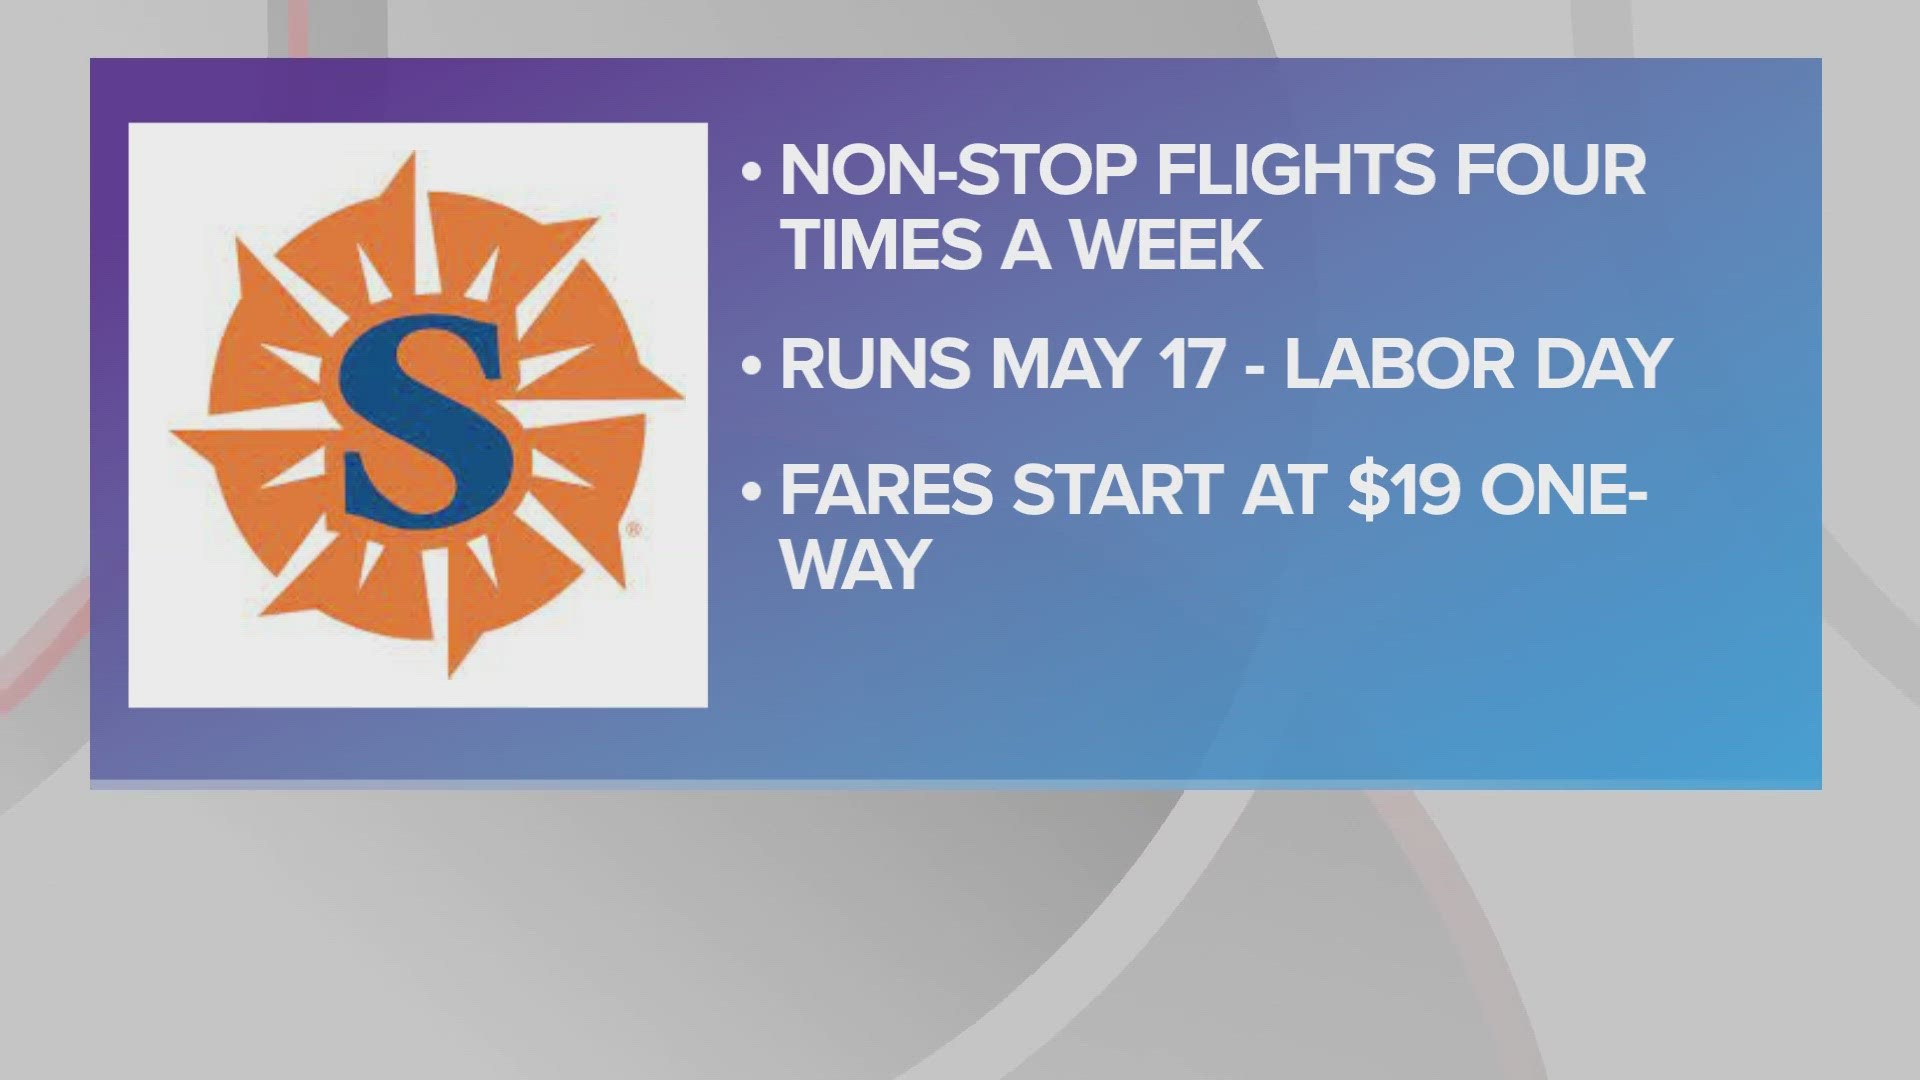 The new route, with fares as low as $19 one way, will operate four times a week from May 17 through Labor Day weekend. Sun Country becomes the 11th airline at CLE.